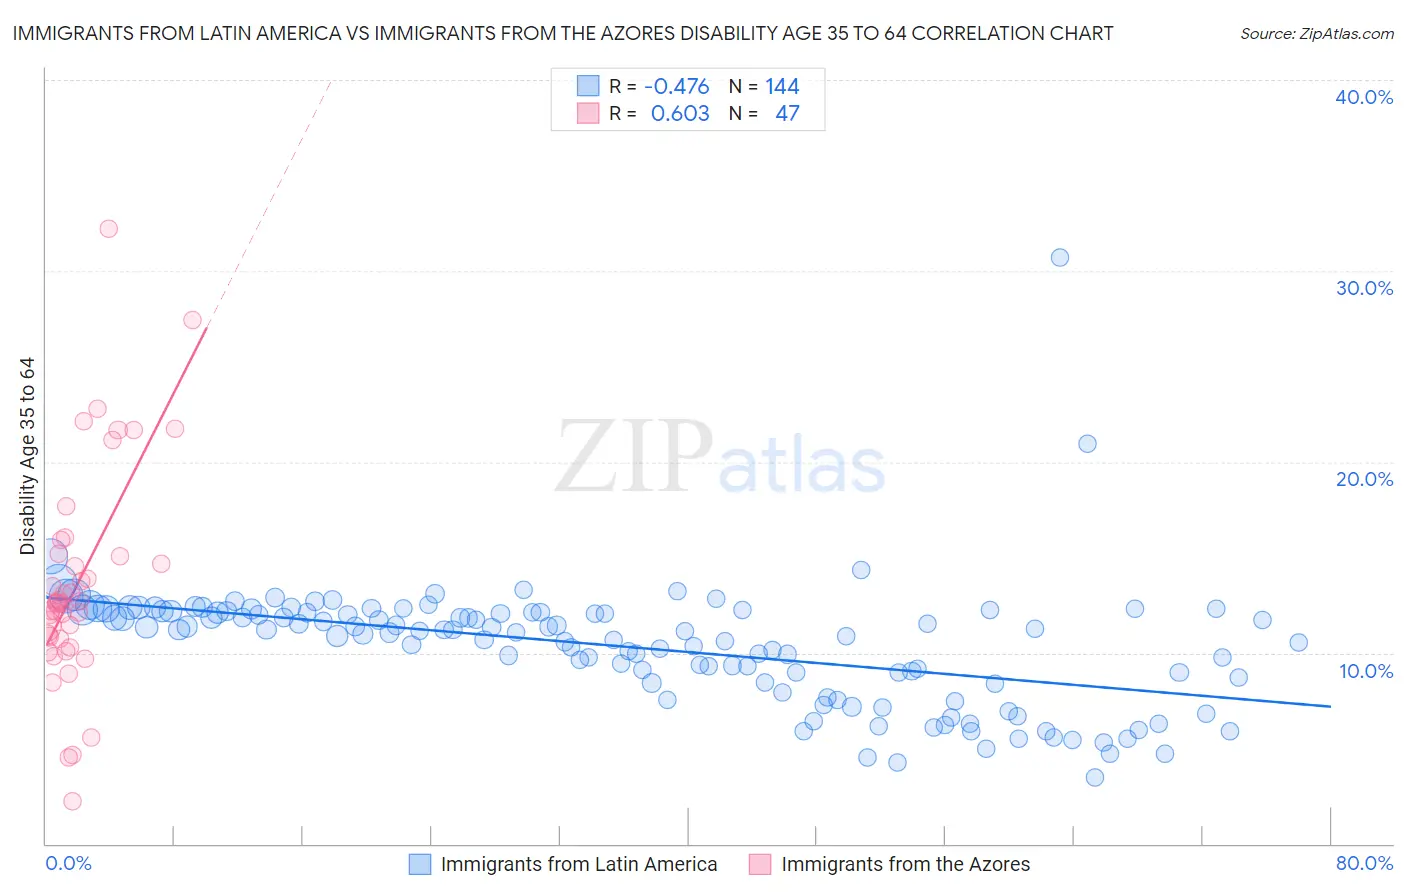 Immigrants from Latin America vs Immigrants from the Azores Disability Age 35 to 64